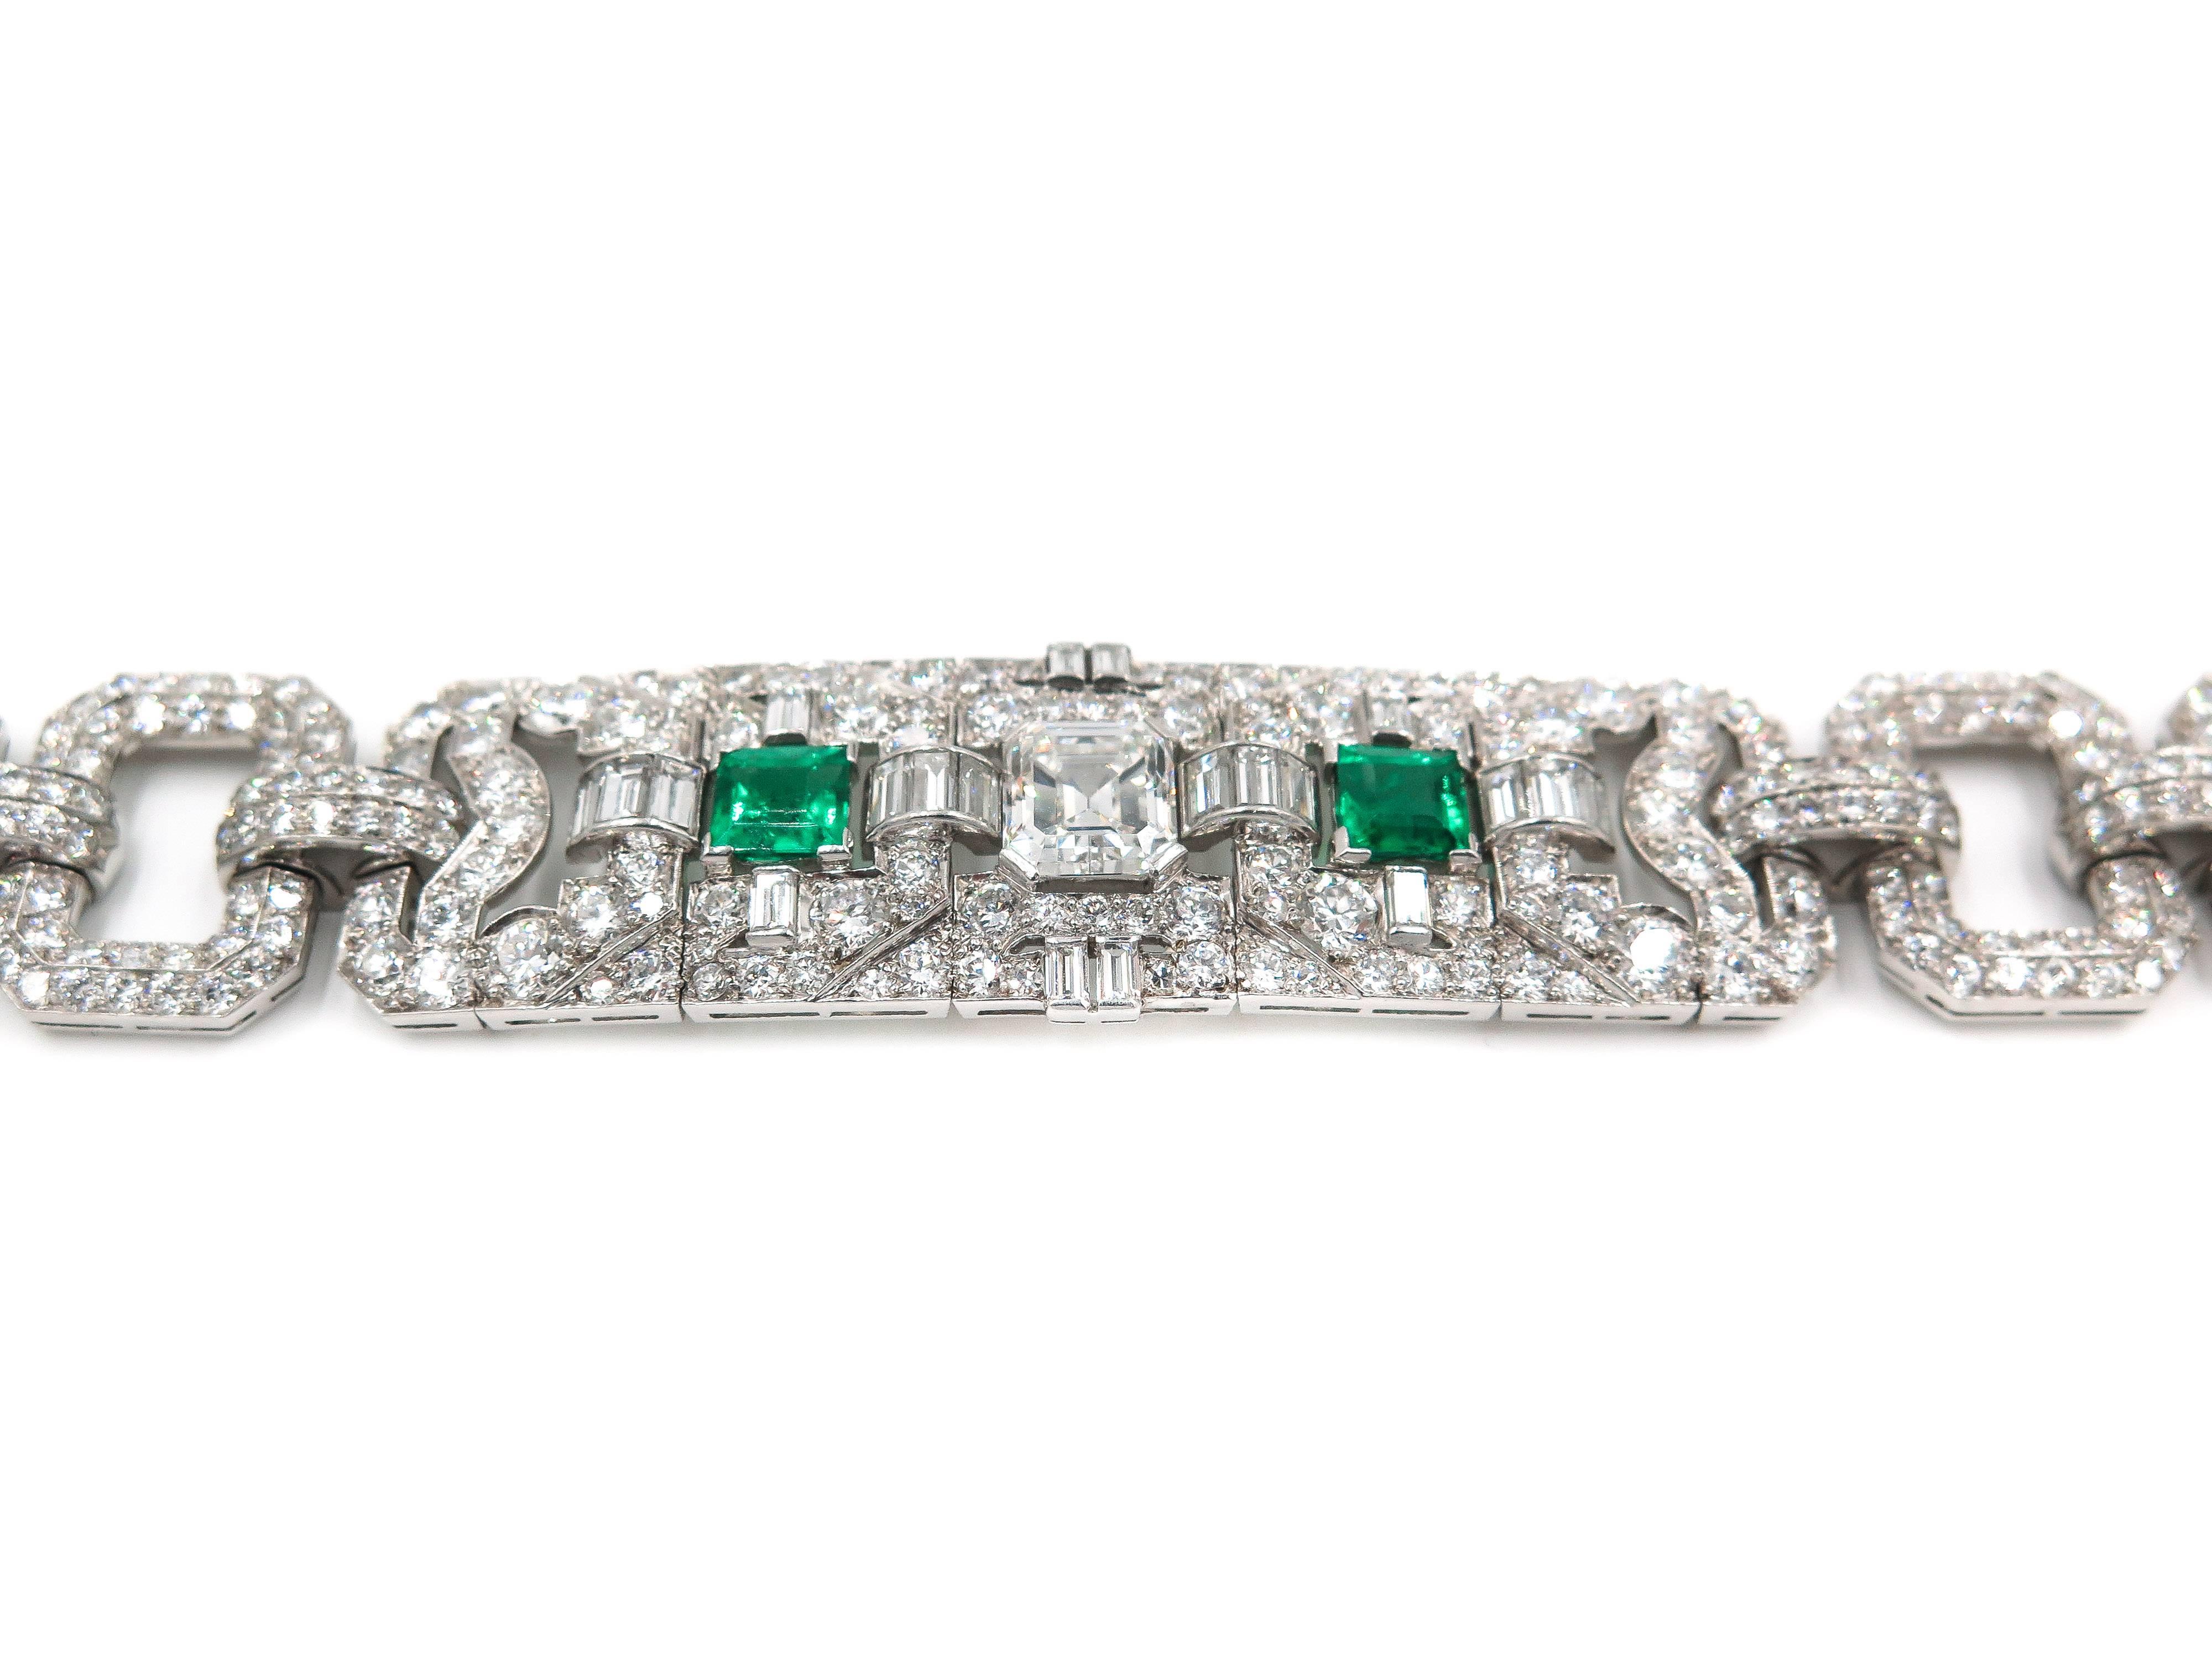 Art Deco Style Emerald Diamond Platinum Bracelet In Excellent Condition For Sale In Greenwich, CT